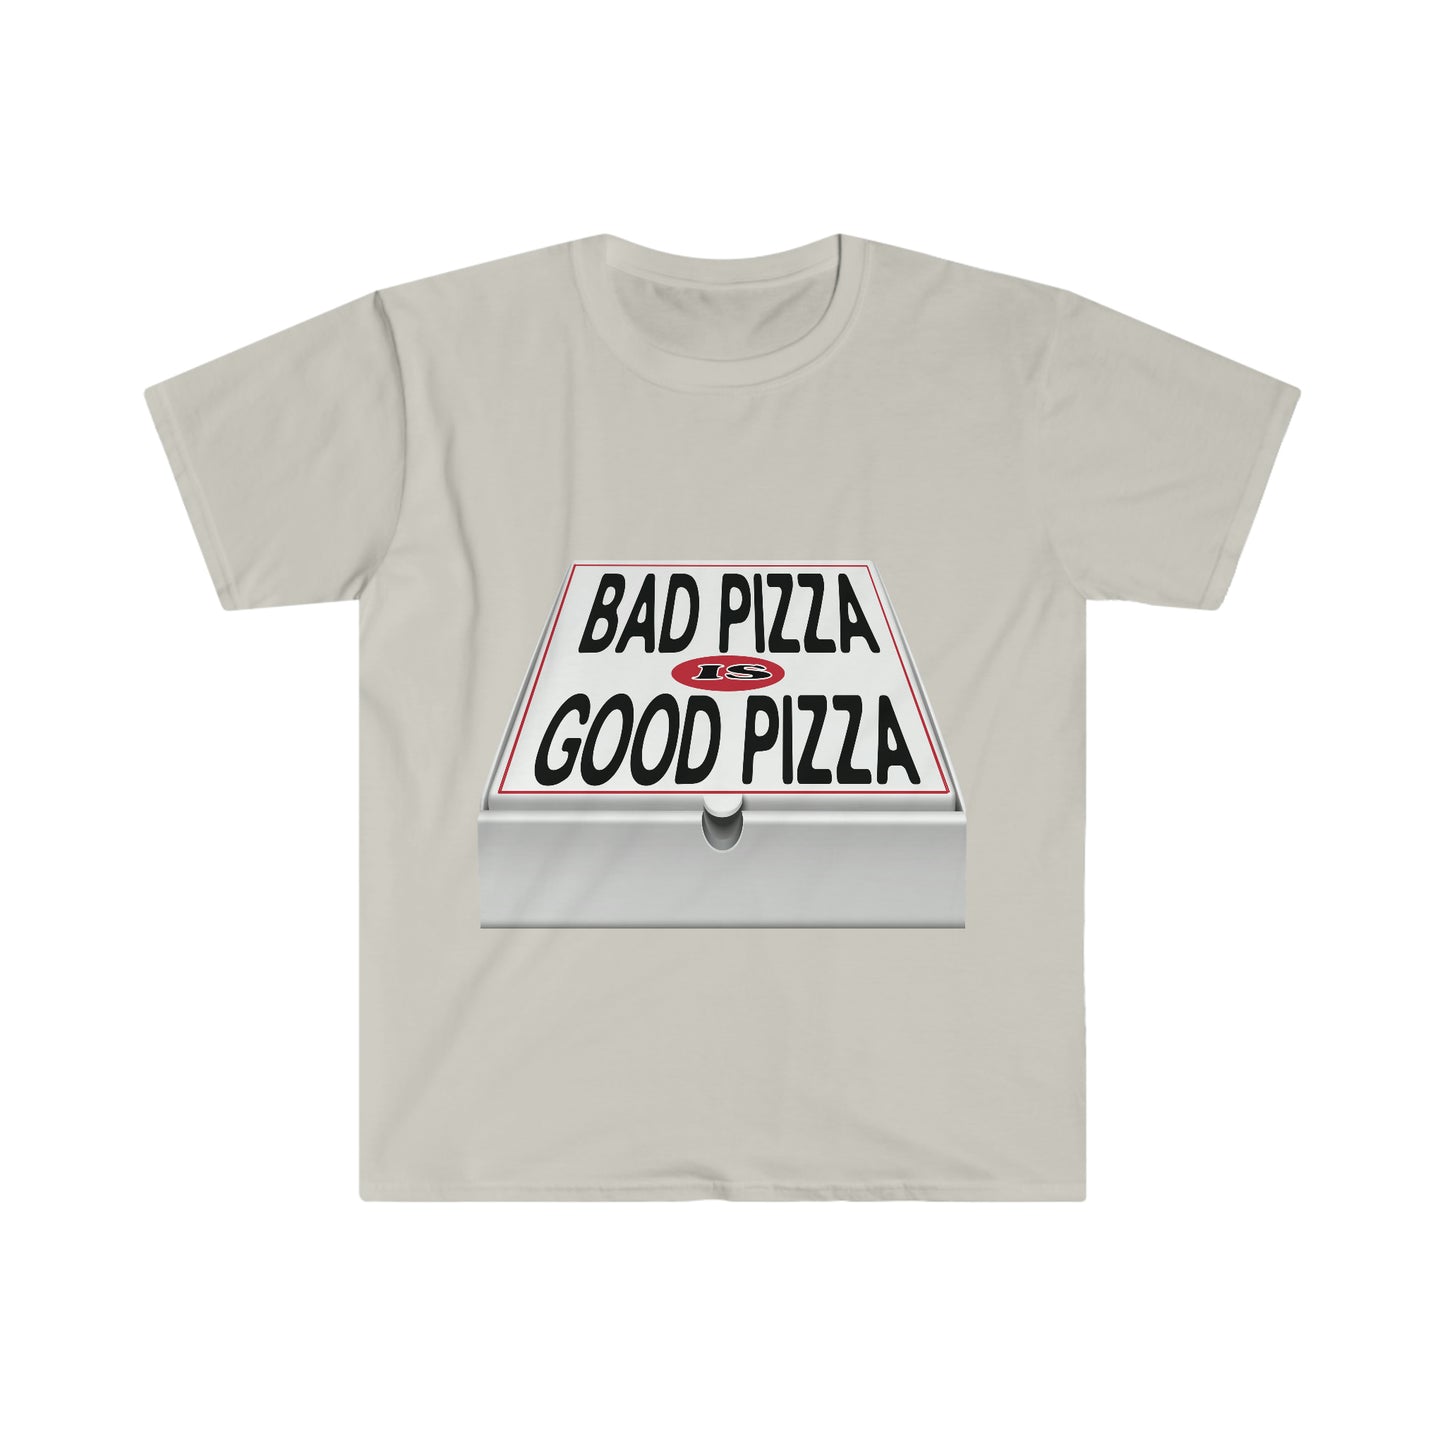 BAD PIZZA IS GOOD PIZZA